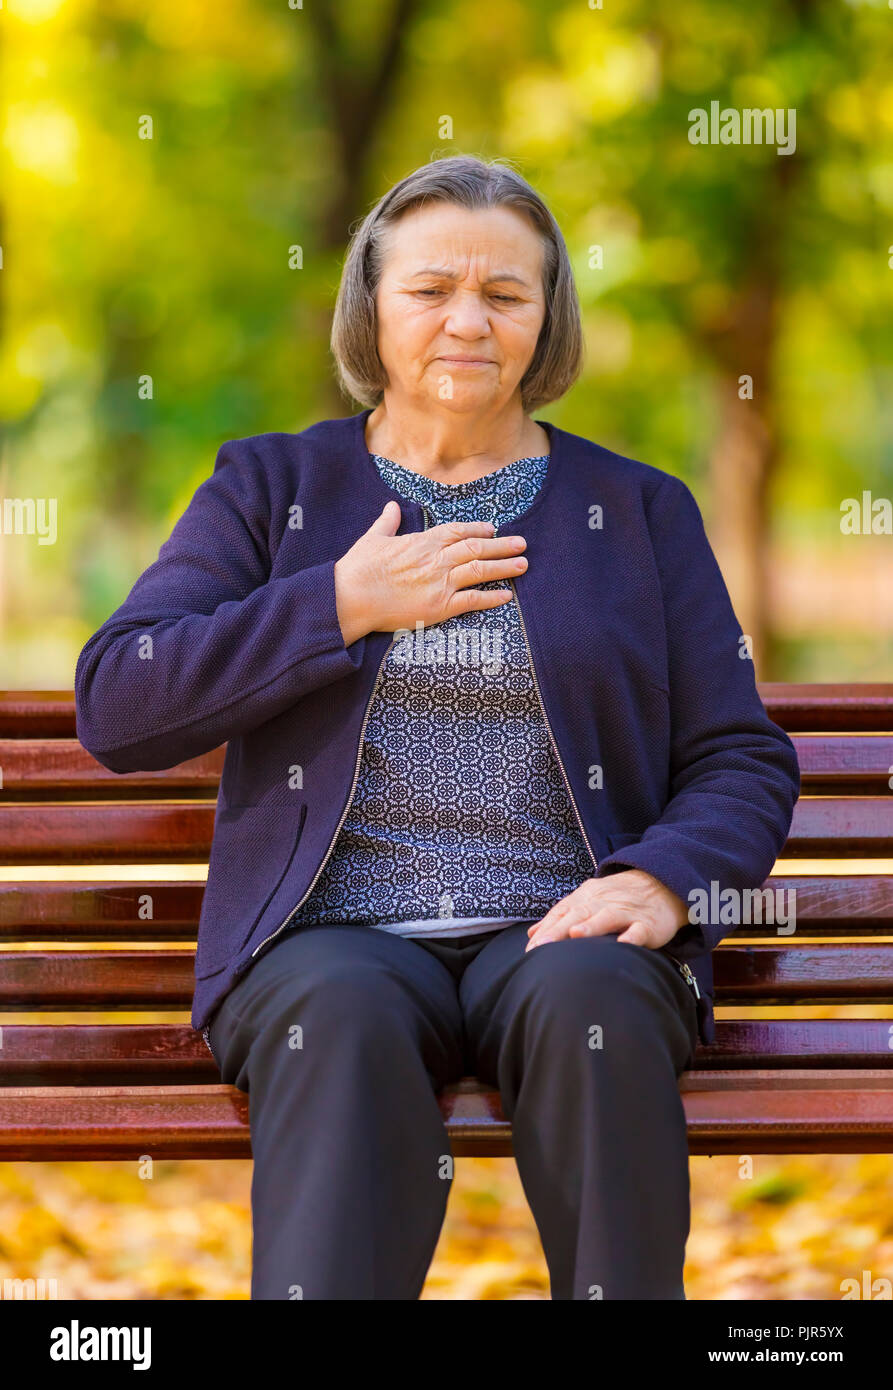 Senior lady clutching her chest in pain at the first signs of angina or a myocardial infarct or heart attack, upper body in park on a autumn day Stock Photo